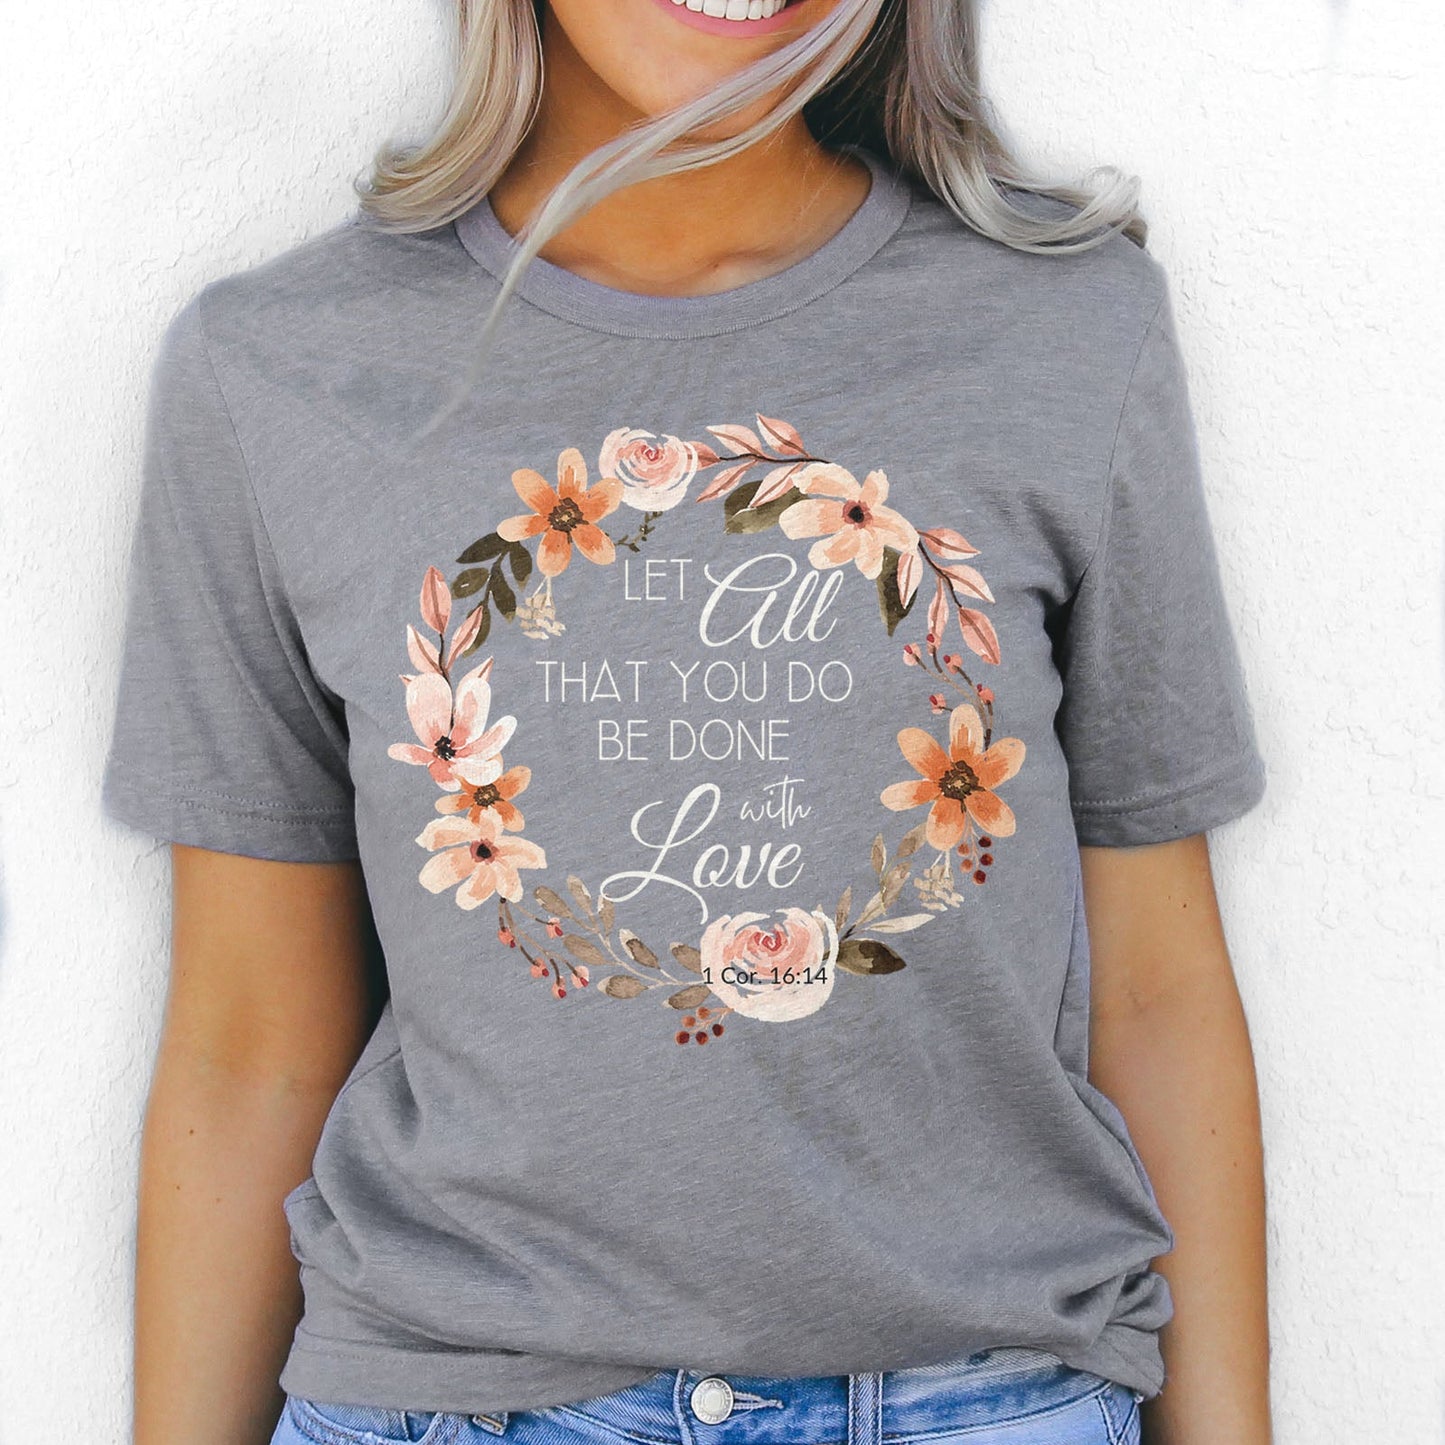 Let All That You Do Be Done With Love 1 Corinthians 16:14 Pink Wreath Tee Shirts For Women - Christian Shirts for Women 